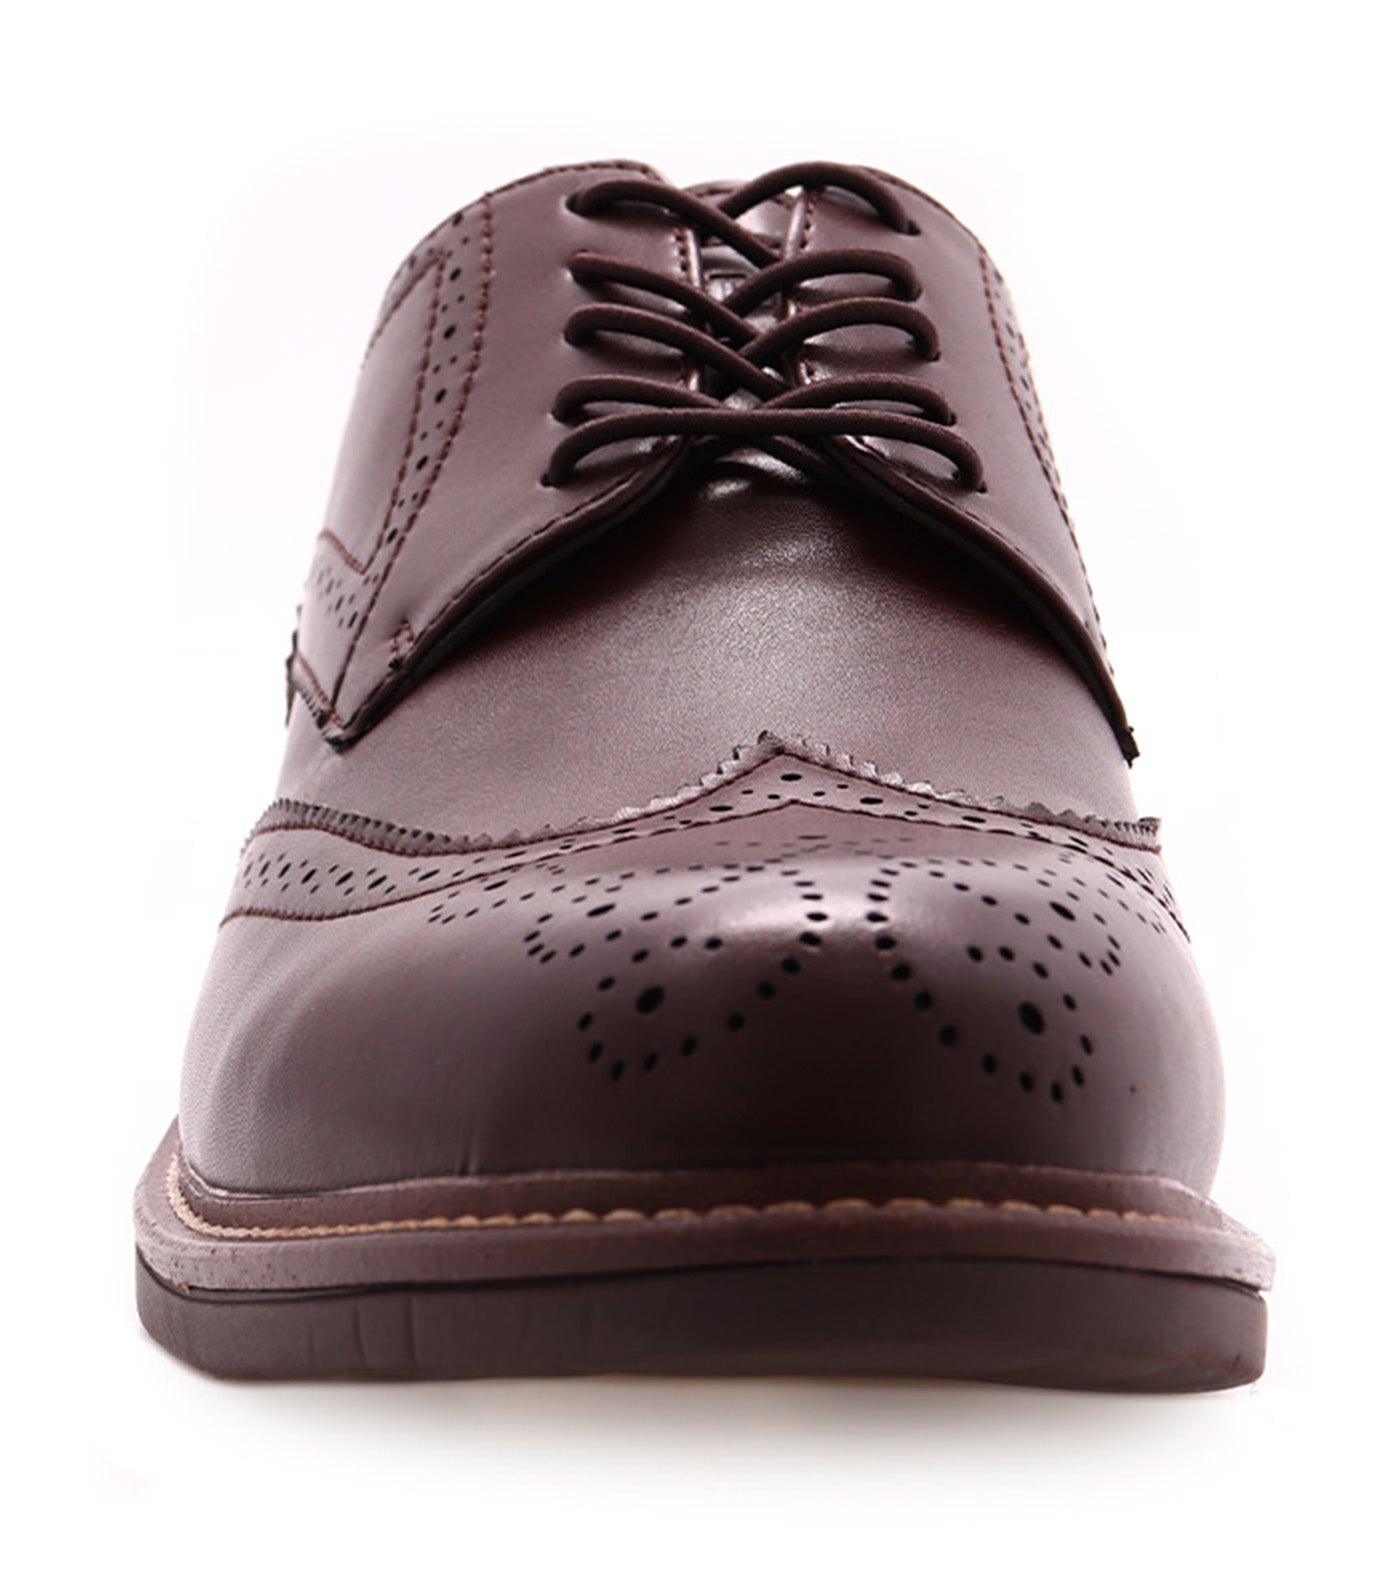 The Flex Brogue Lace Up Coffee